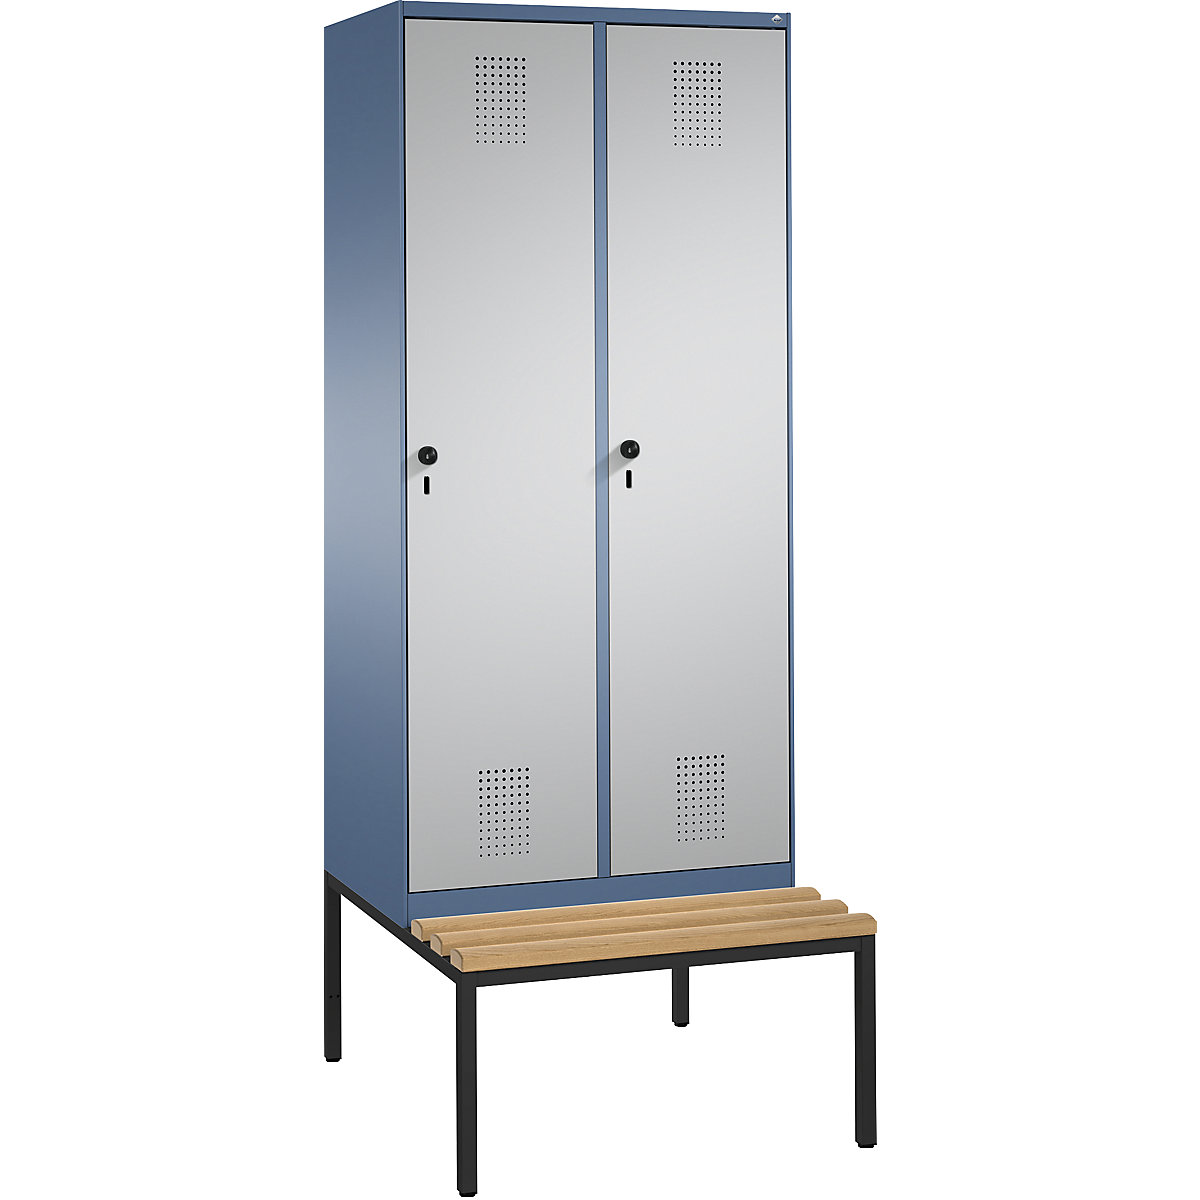 EVOLO cloakroom locker, with bench - C+P